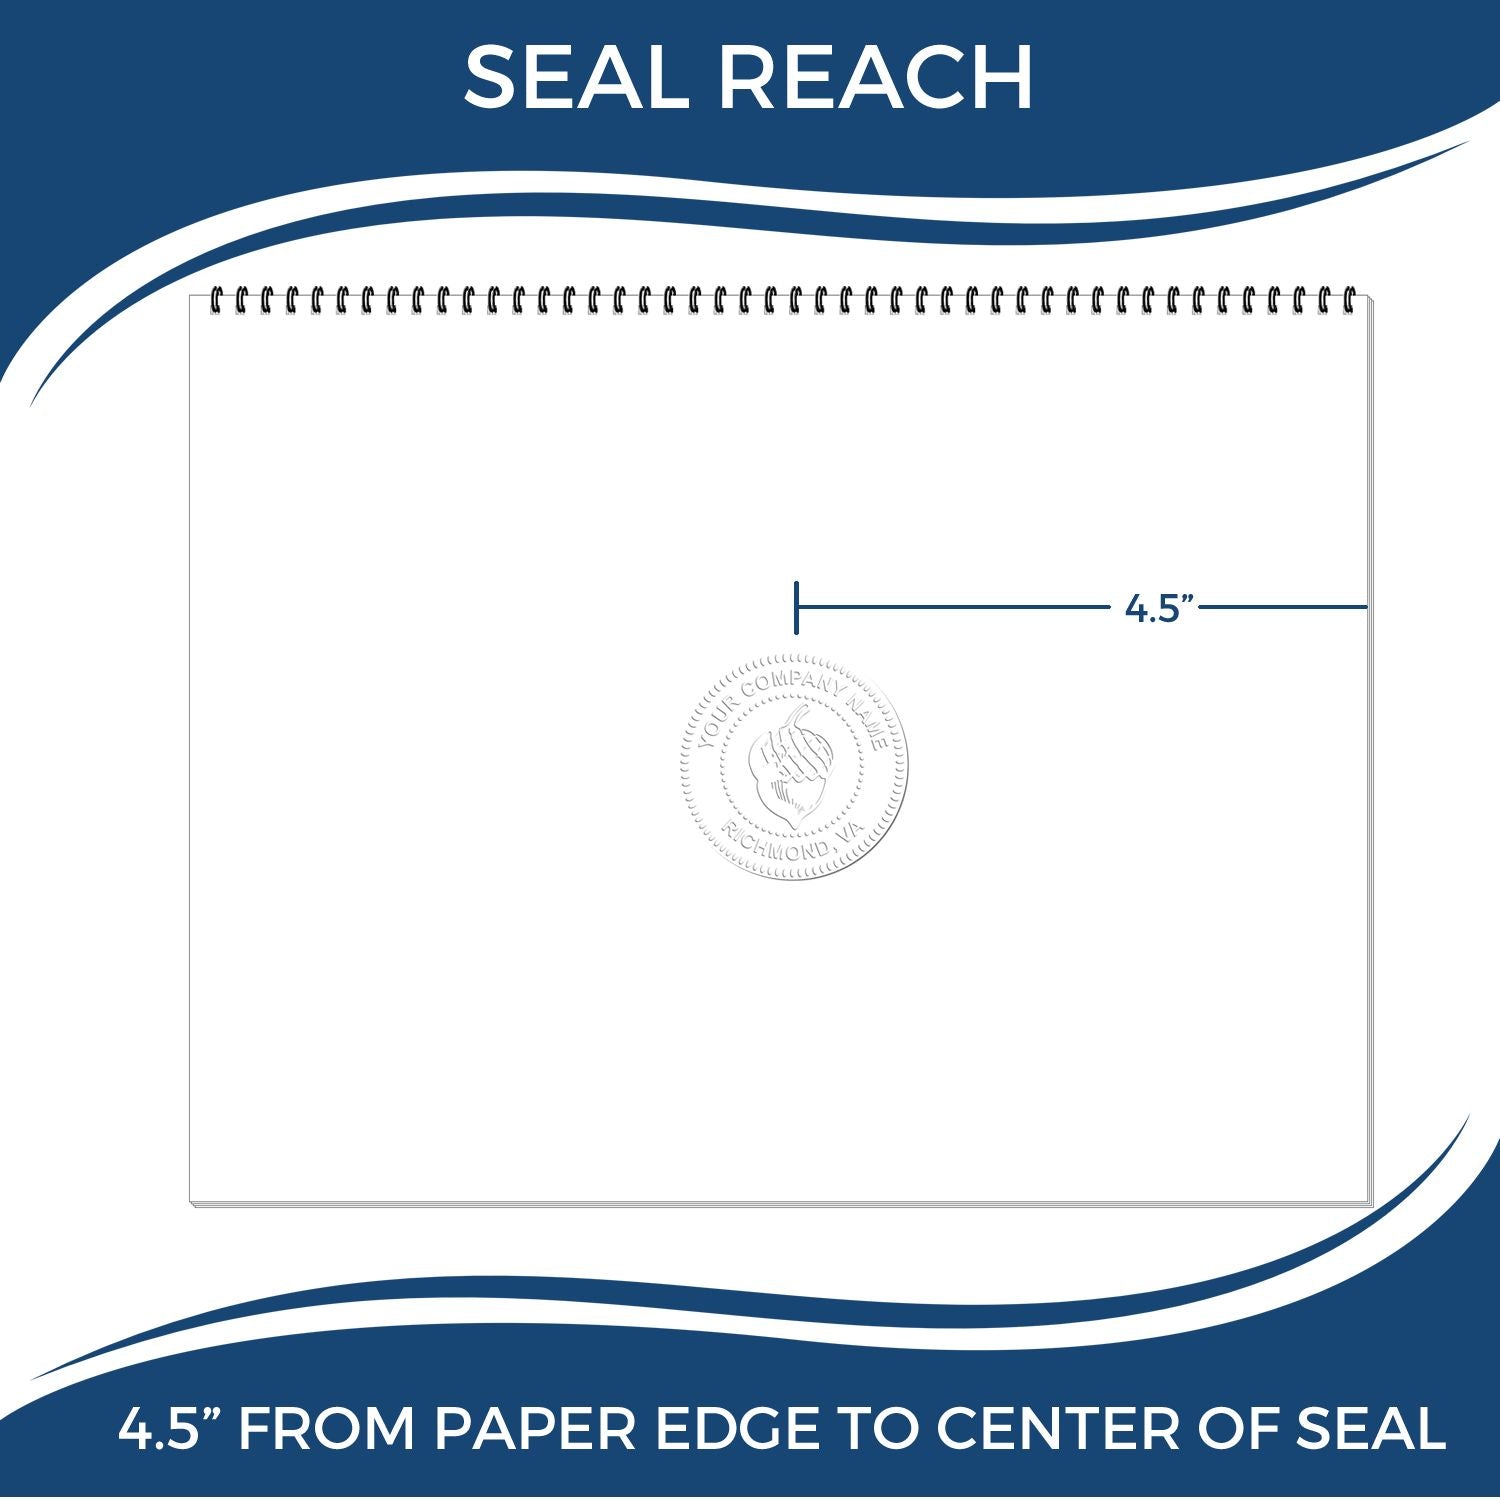 An infographic showing the seal reach which is represented by a ruler and a miniature seal image of the Extended Long Reach Illinois Architect Seal Embosser